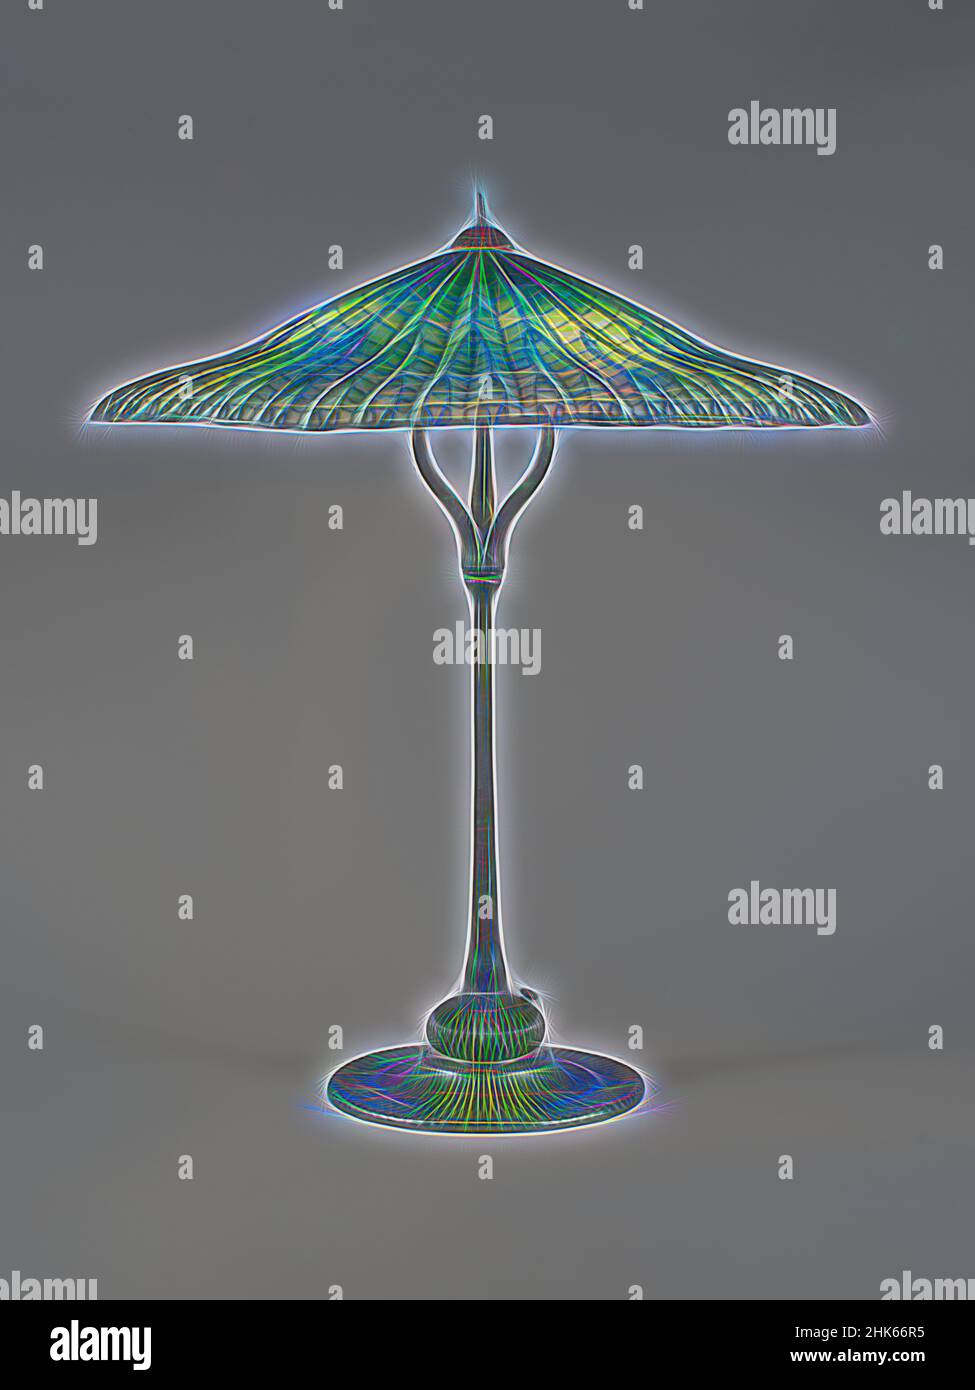 Inspired by Lotus, Pagoda Lamp, Louis Comfort Tiffany, American, 1848–1933, Tiffany Studios, Corona, New York, 1900–1938, c.1900–1905, Bronze and leaded Favrile glass, Made in Corona, New York, United States, North and Central America, Glassware, lighting, 31 1/2  in. x 26 1/8 in. (80 x 66.4 cm, Reimagined by Artotop. Classic art reinvented with a modern twist. Design of warm cheerful glowing of brightness and light ray radiance. Photography inspired by surrealism and futurism, embracing dynamic energy of modern technology, movement, speed and revolutionize culture Stock Photo